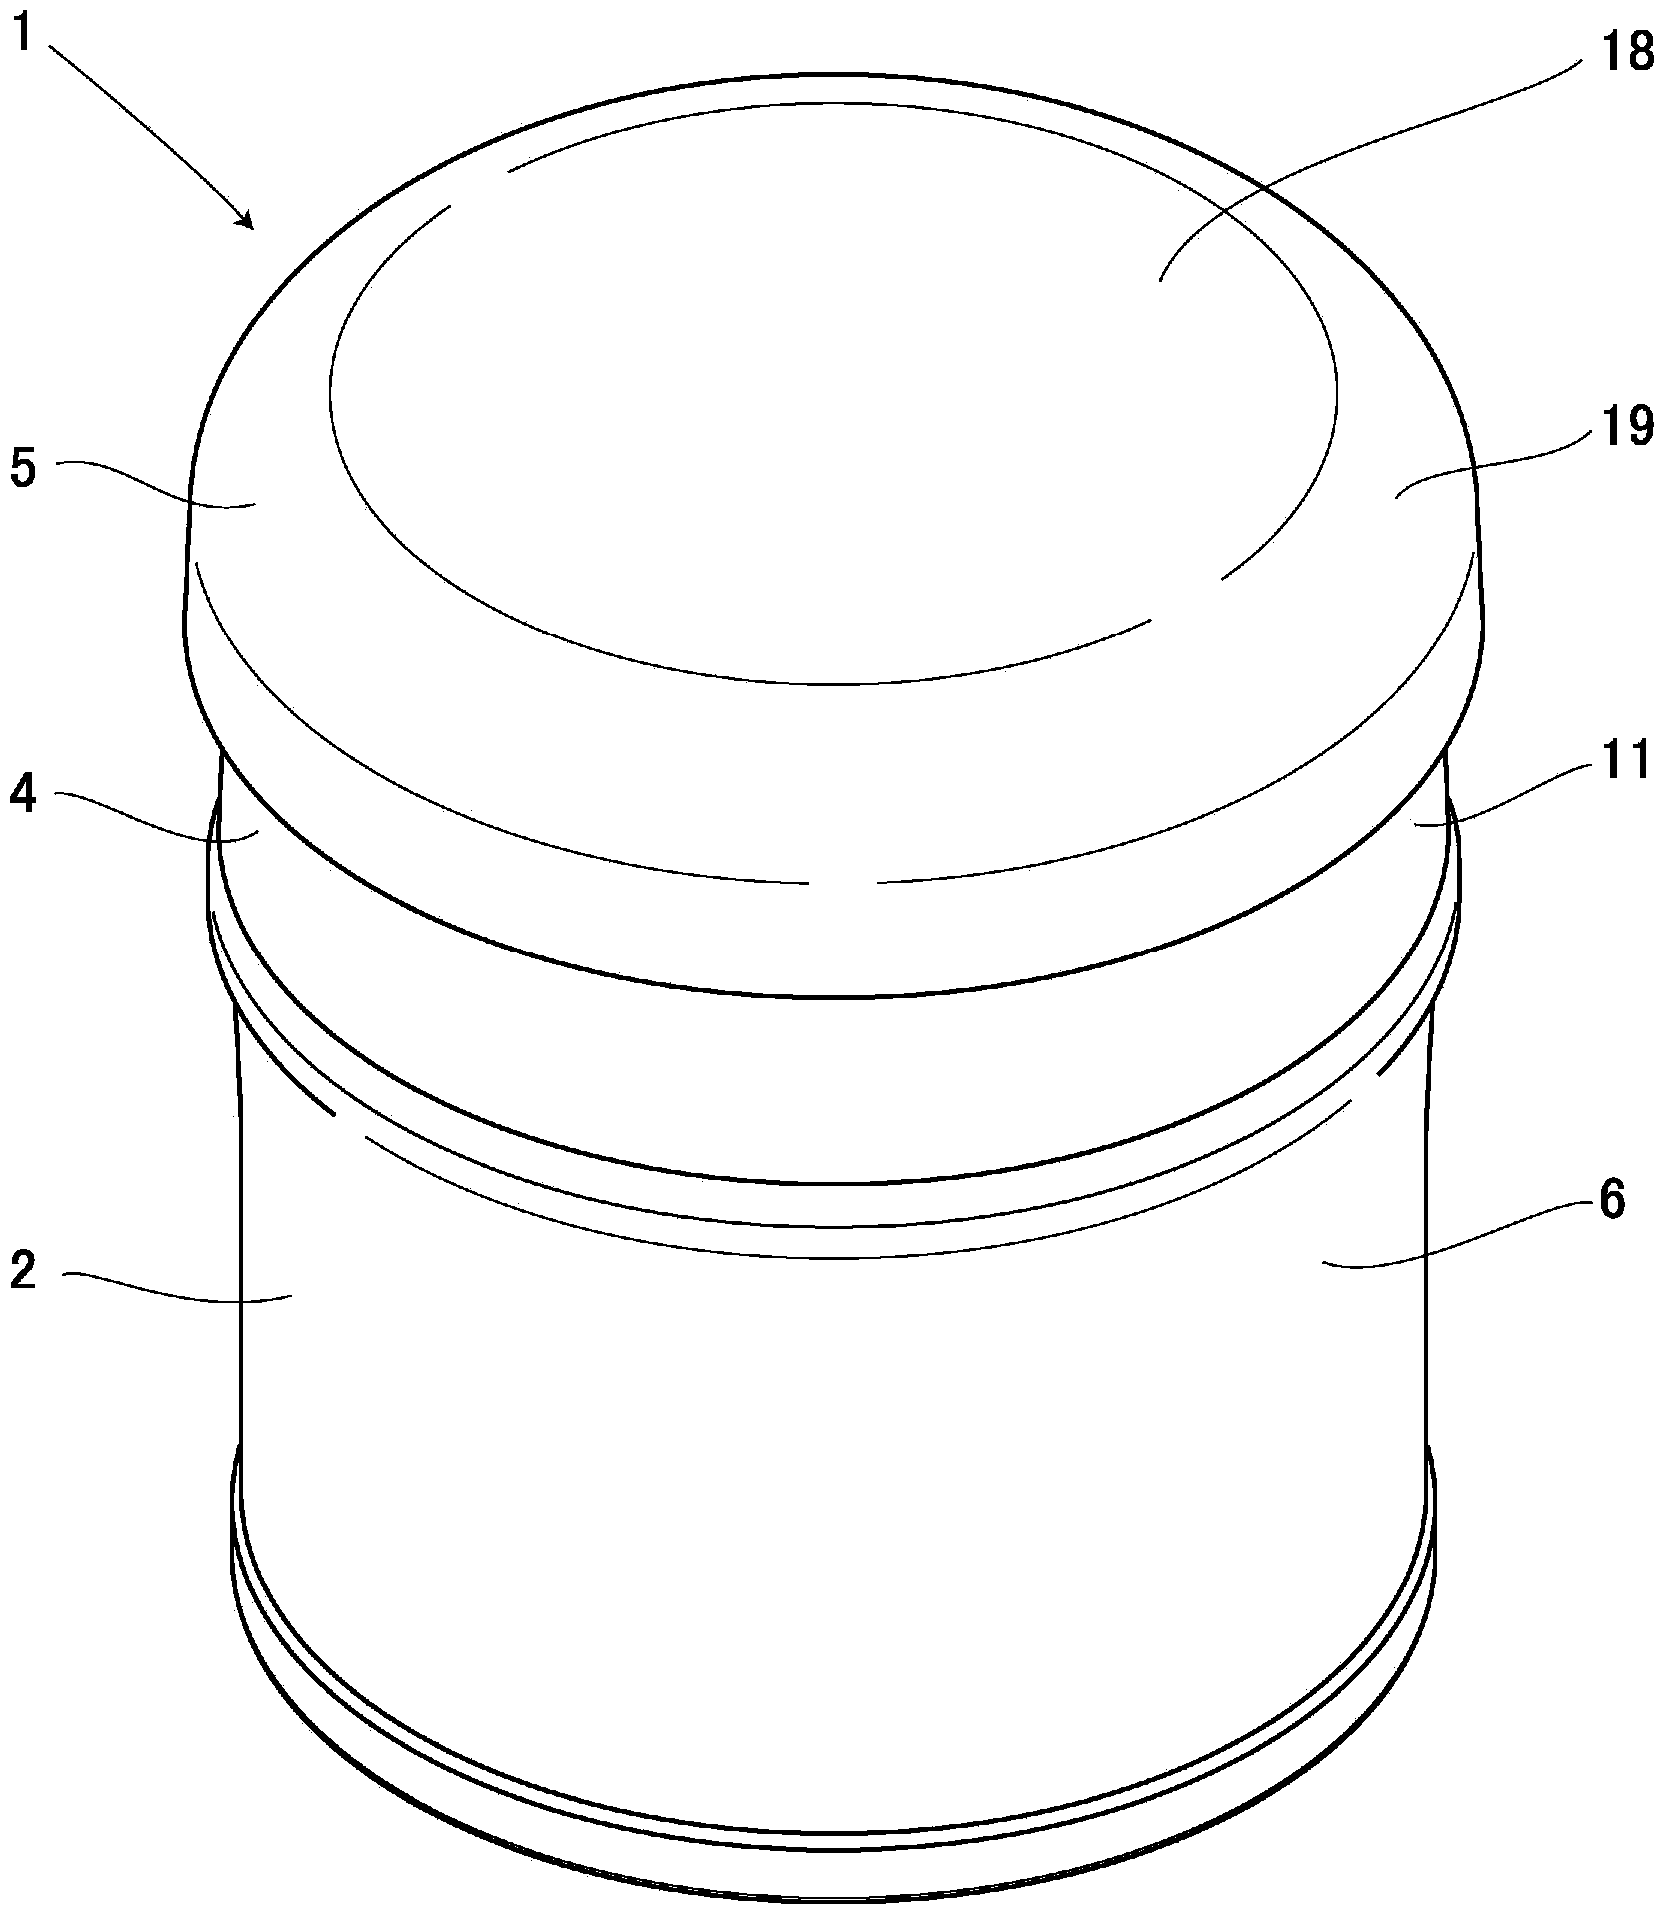 Container with lid